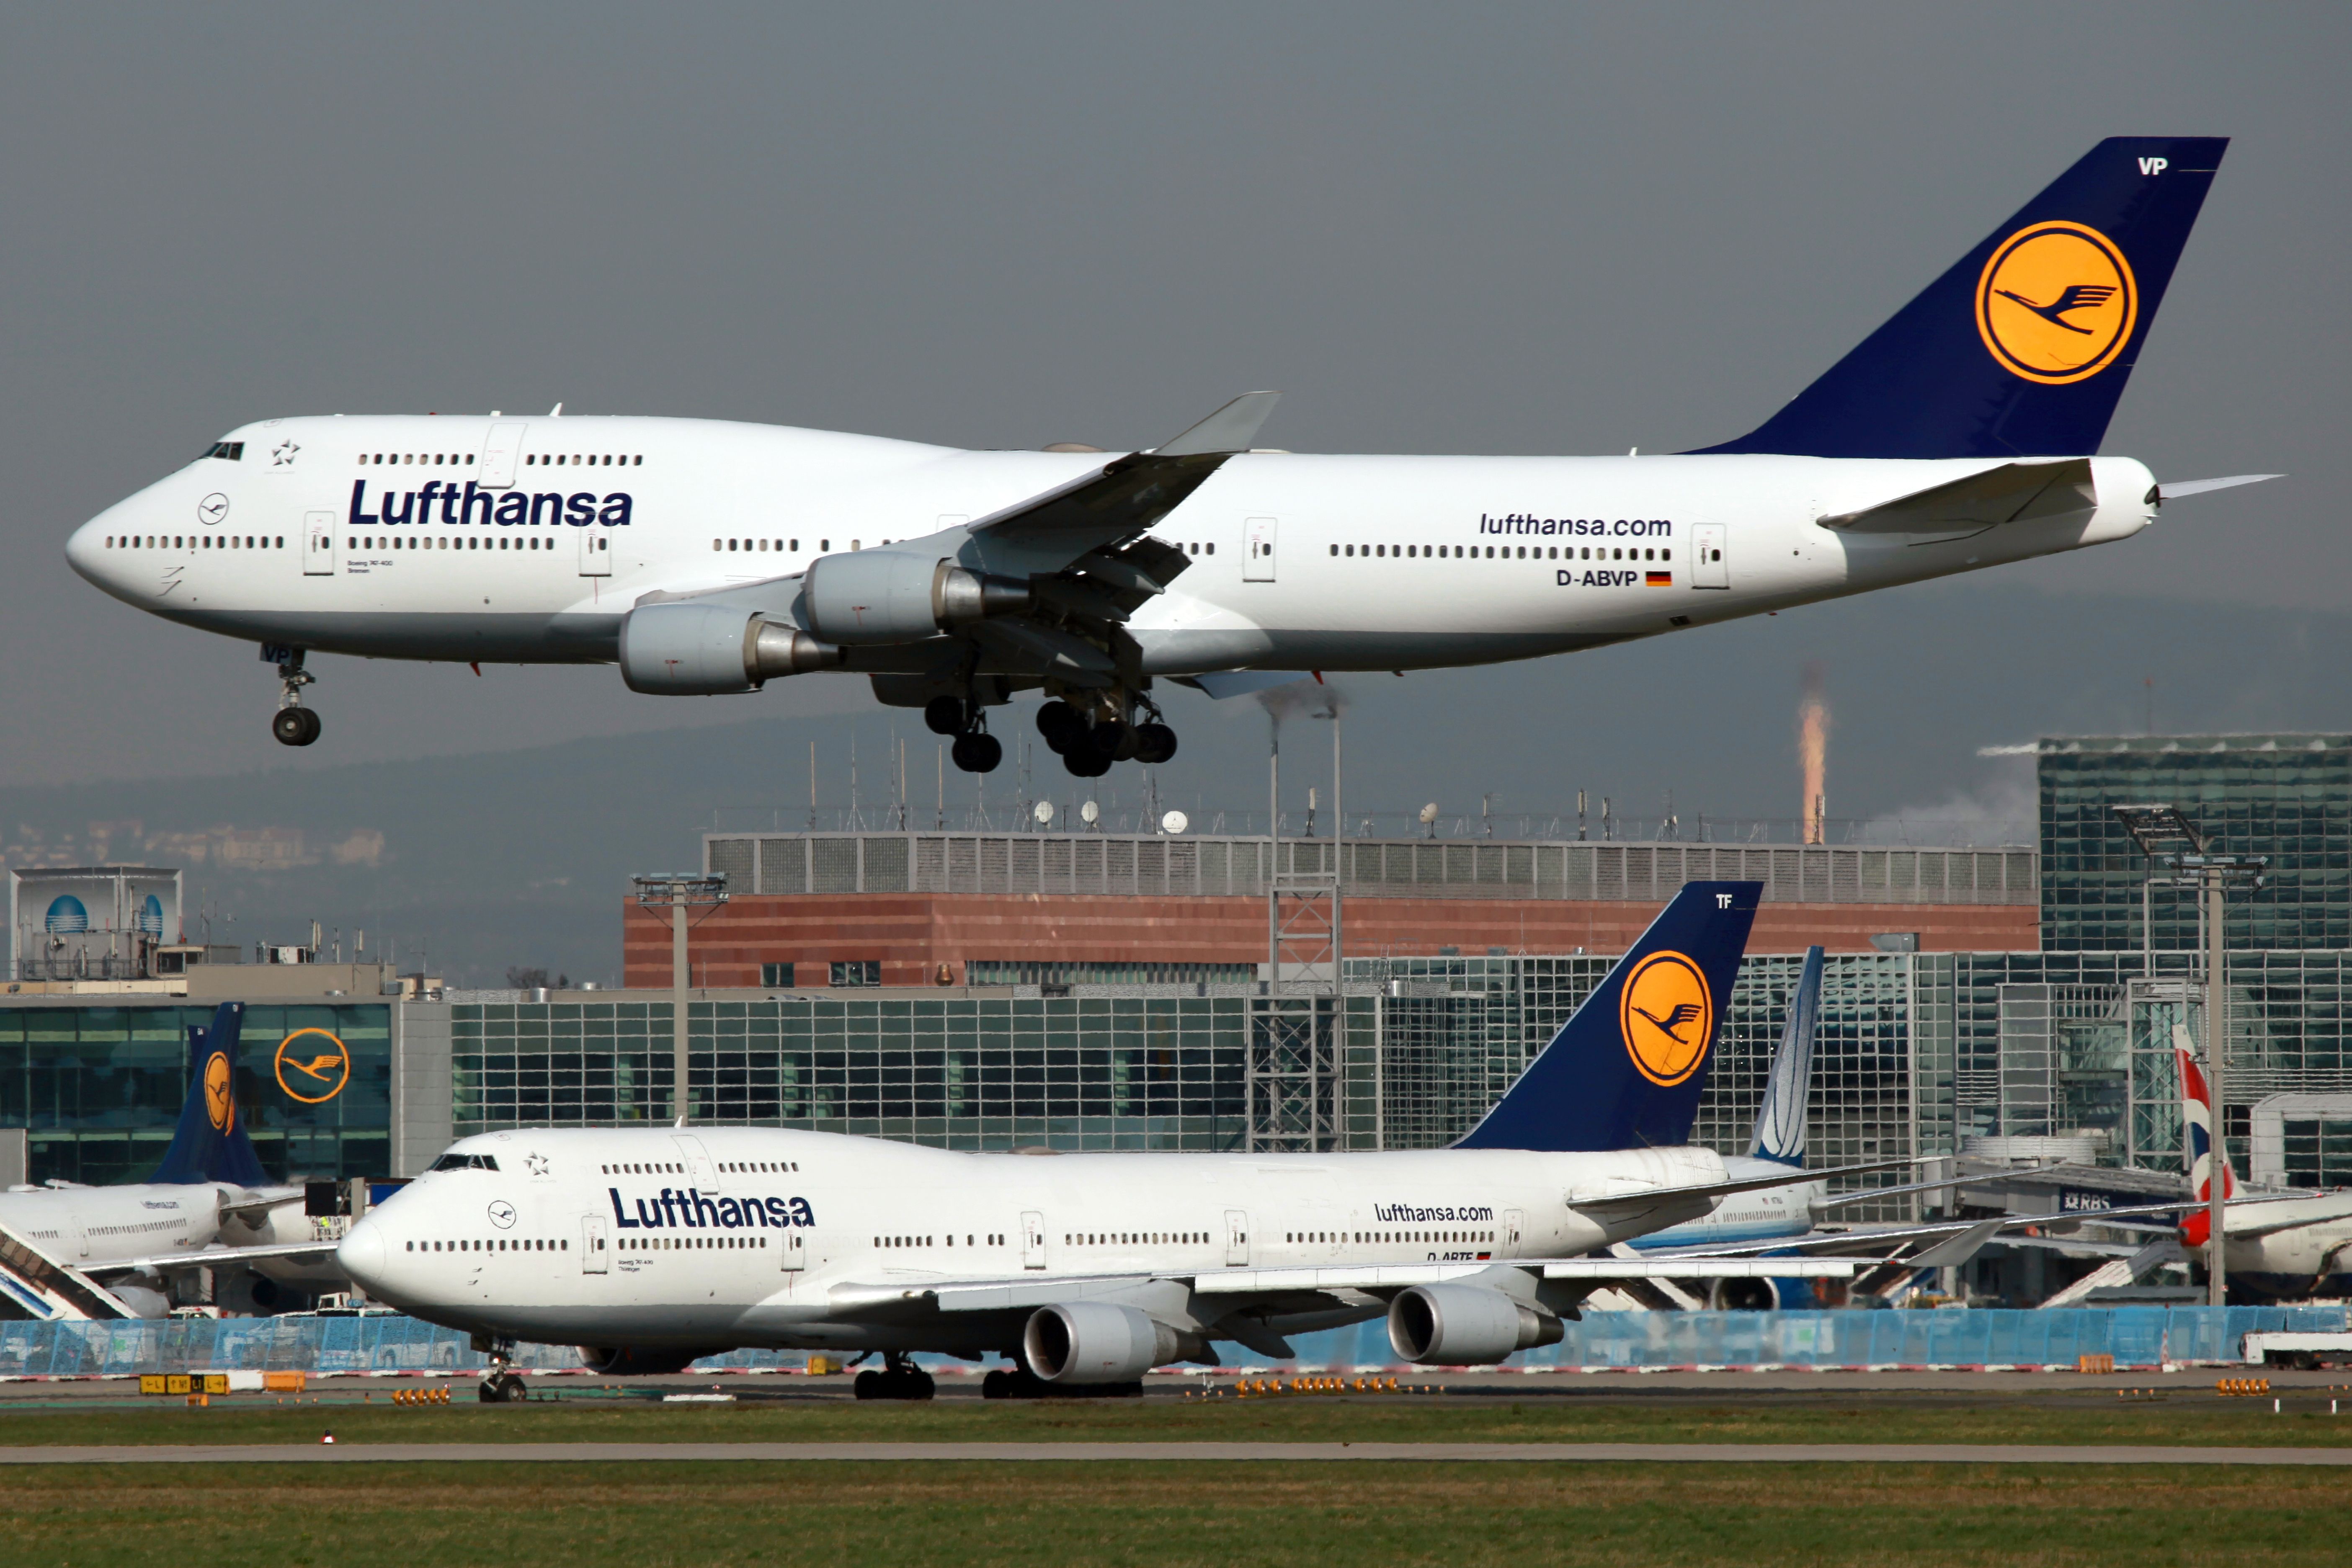 Two Lufthansa Boeing 747s, one taxiing and the other one landing.